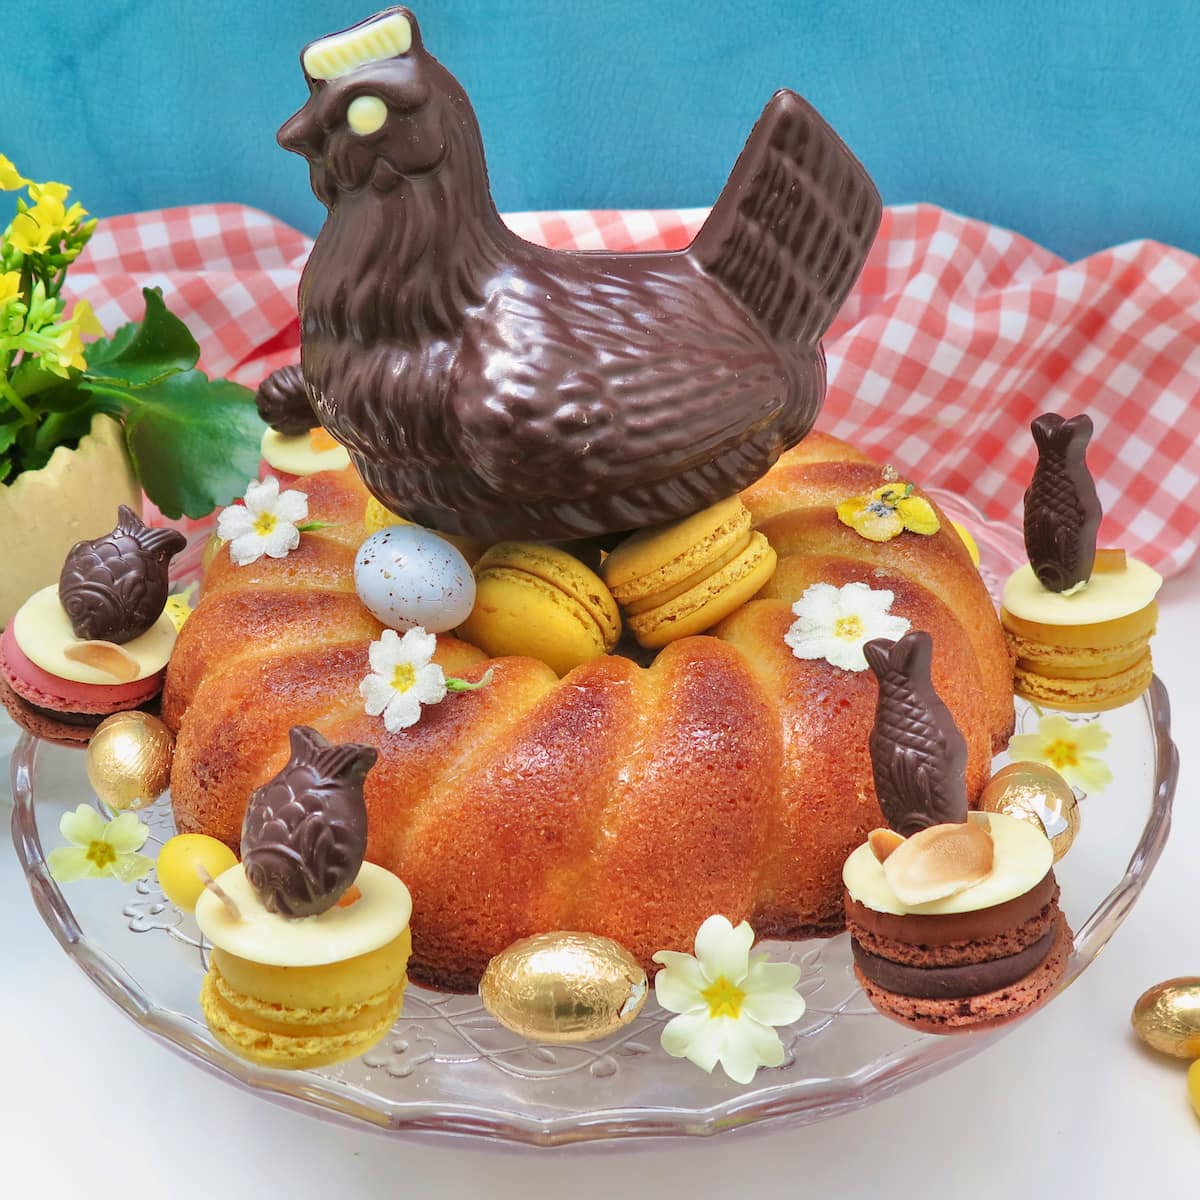 lemon drizzle cake like a nest topped with chocolate hen and macaron eggs